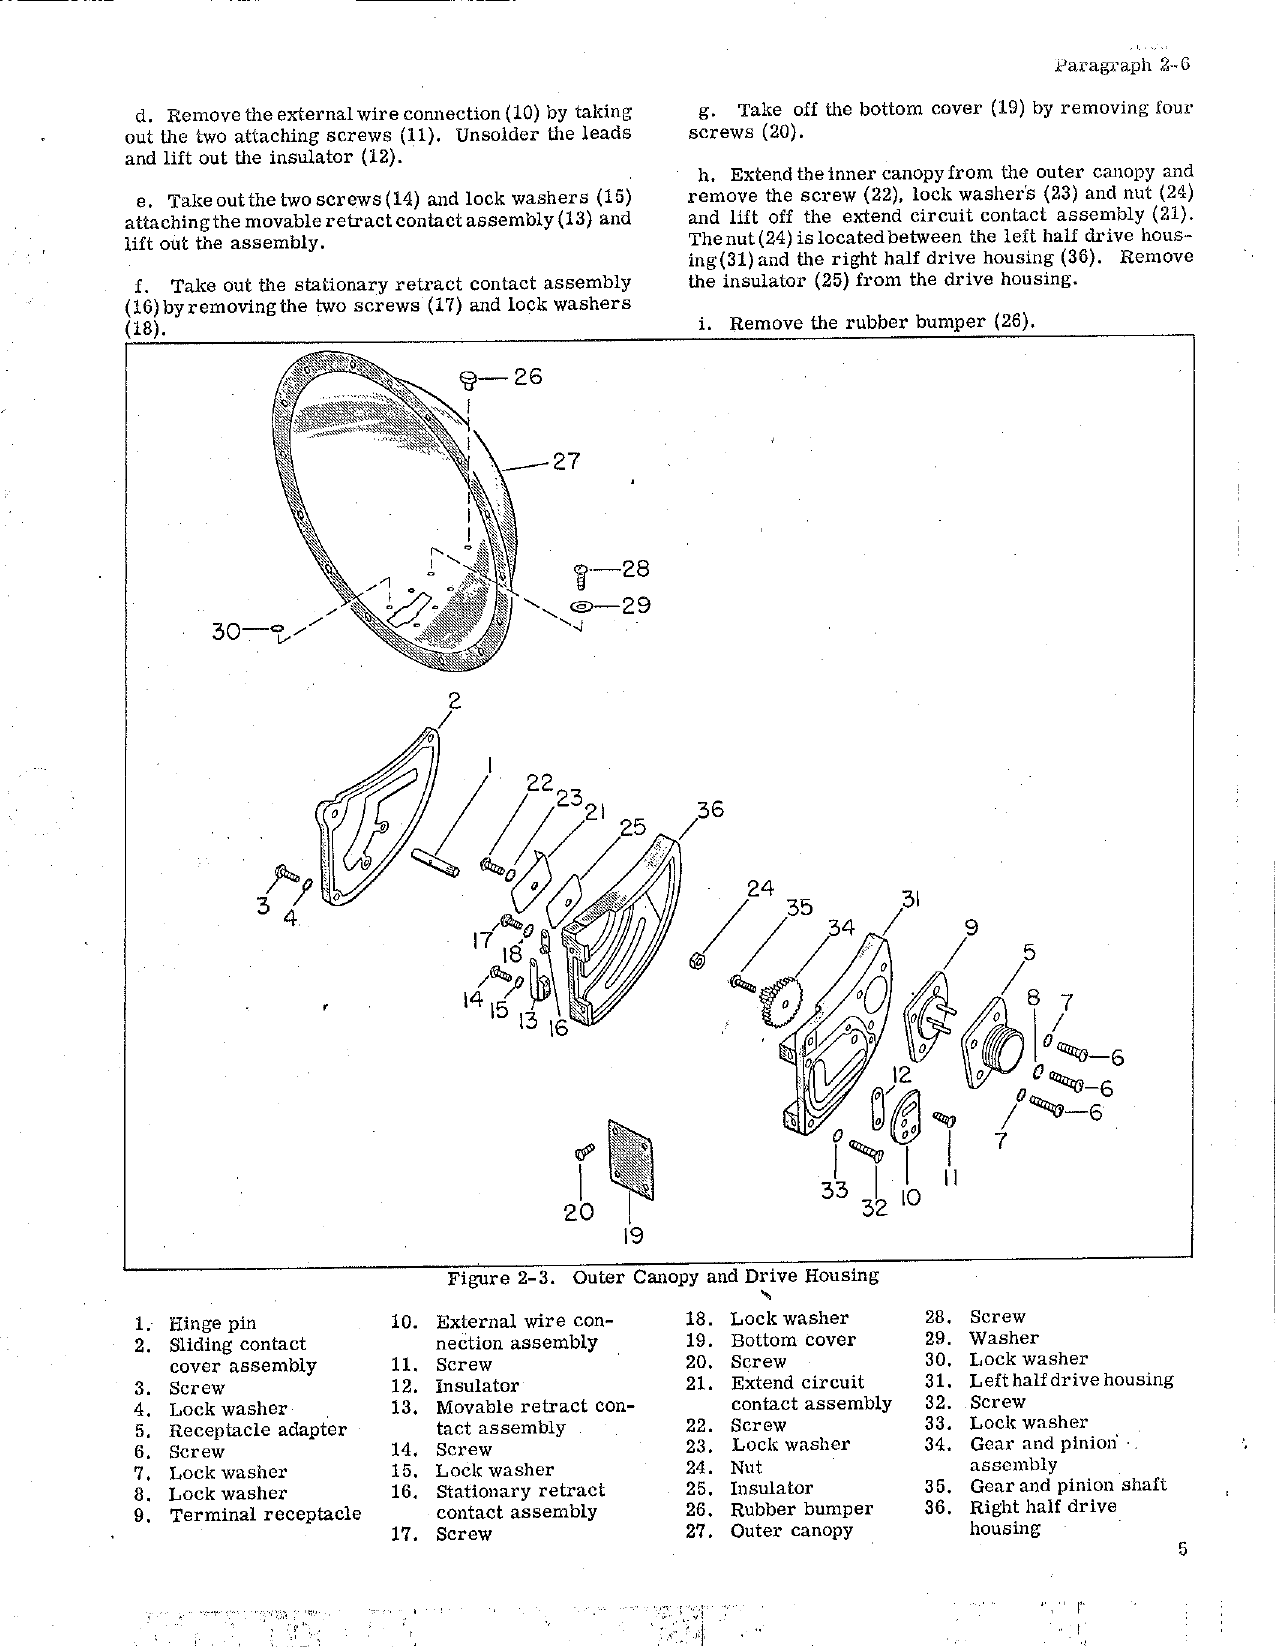 Sample page 9 from AirCorps Library document: Overhaul Instructions for Electrically Retractable Landing Light Assembly - AN 3095